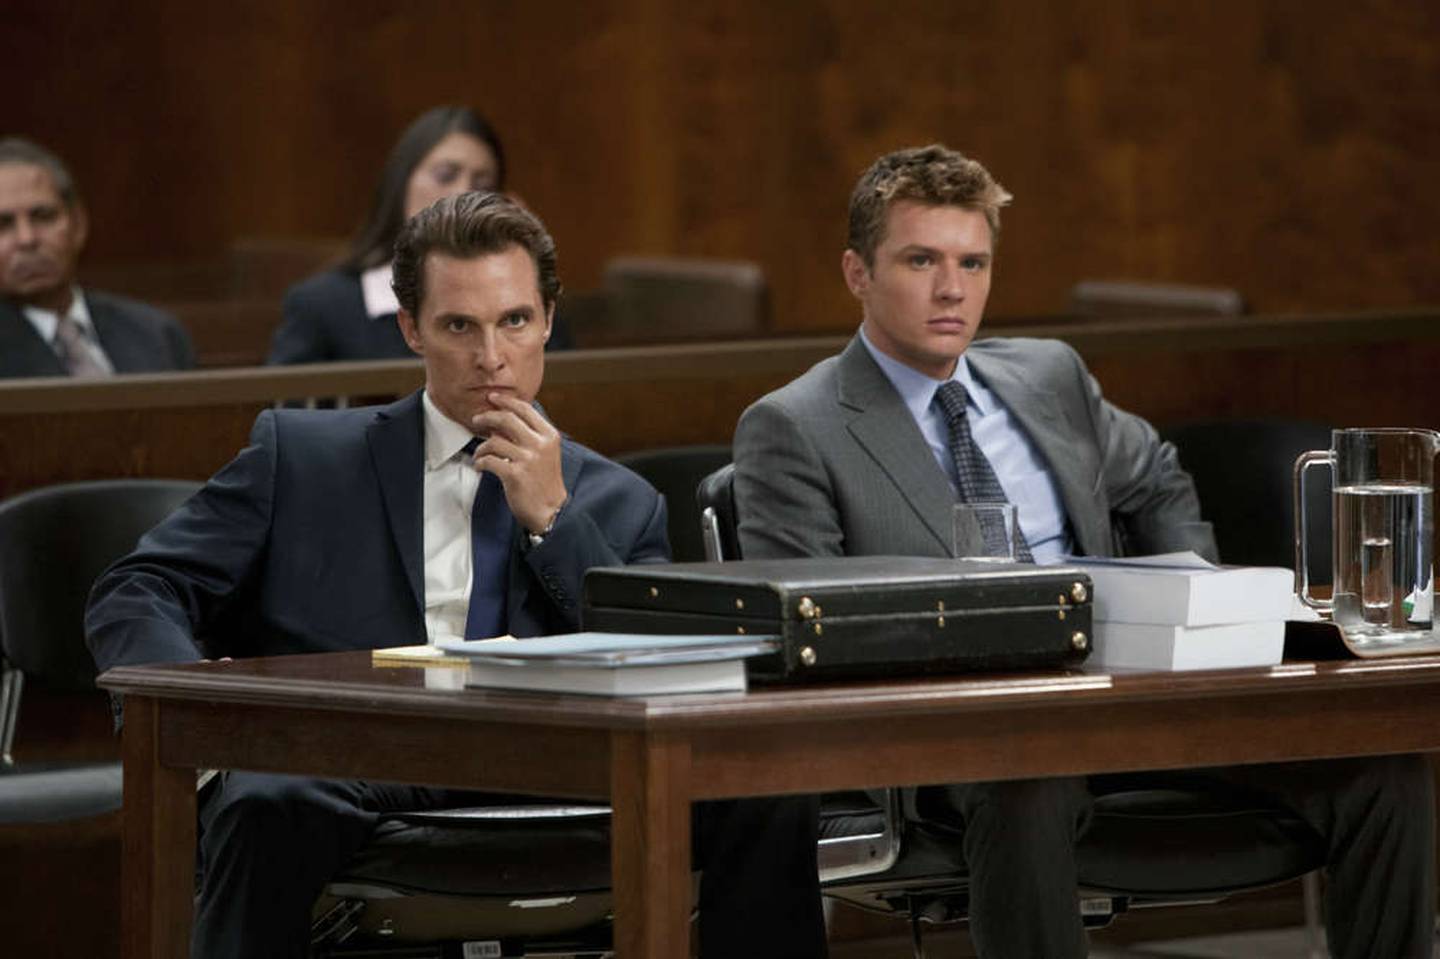 Hollywood courtroom dramas are awash with behaviour that would get a real-life lawyer disbarred. Matthew McConaughey and Ryan Phillippe in 'The Lincoln Lawyer'.  Photo: Lionsgate